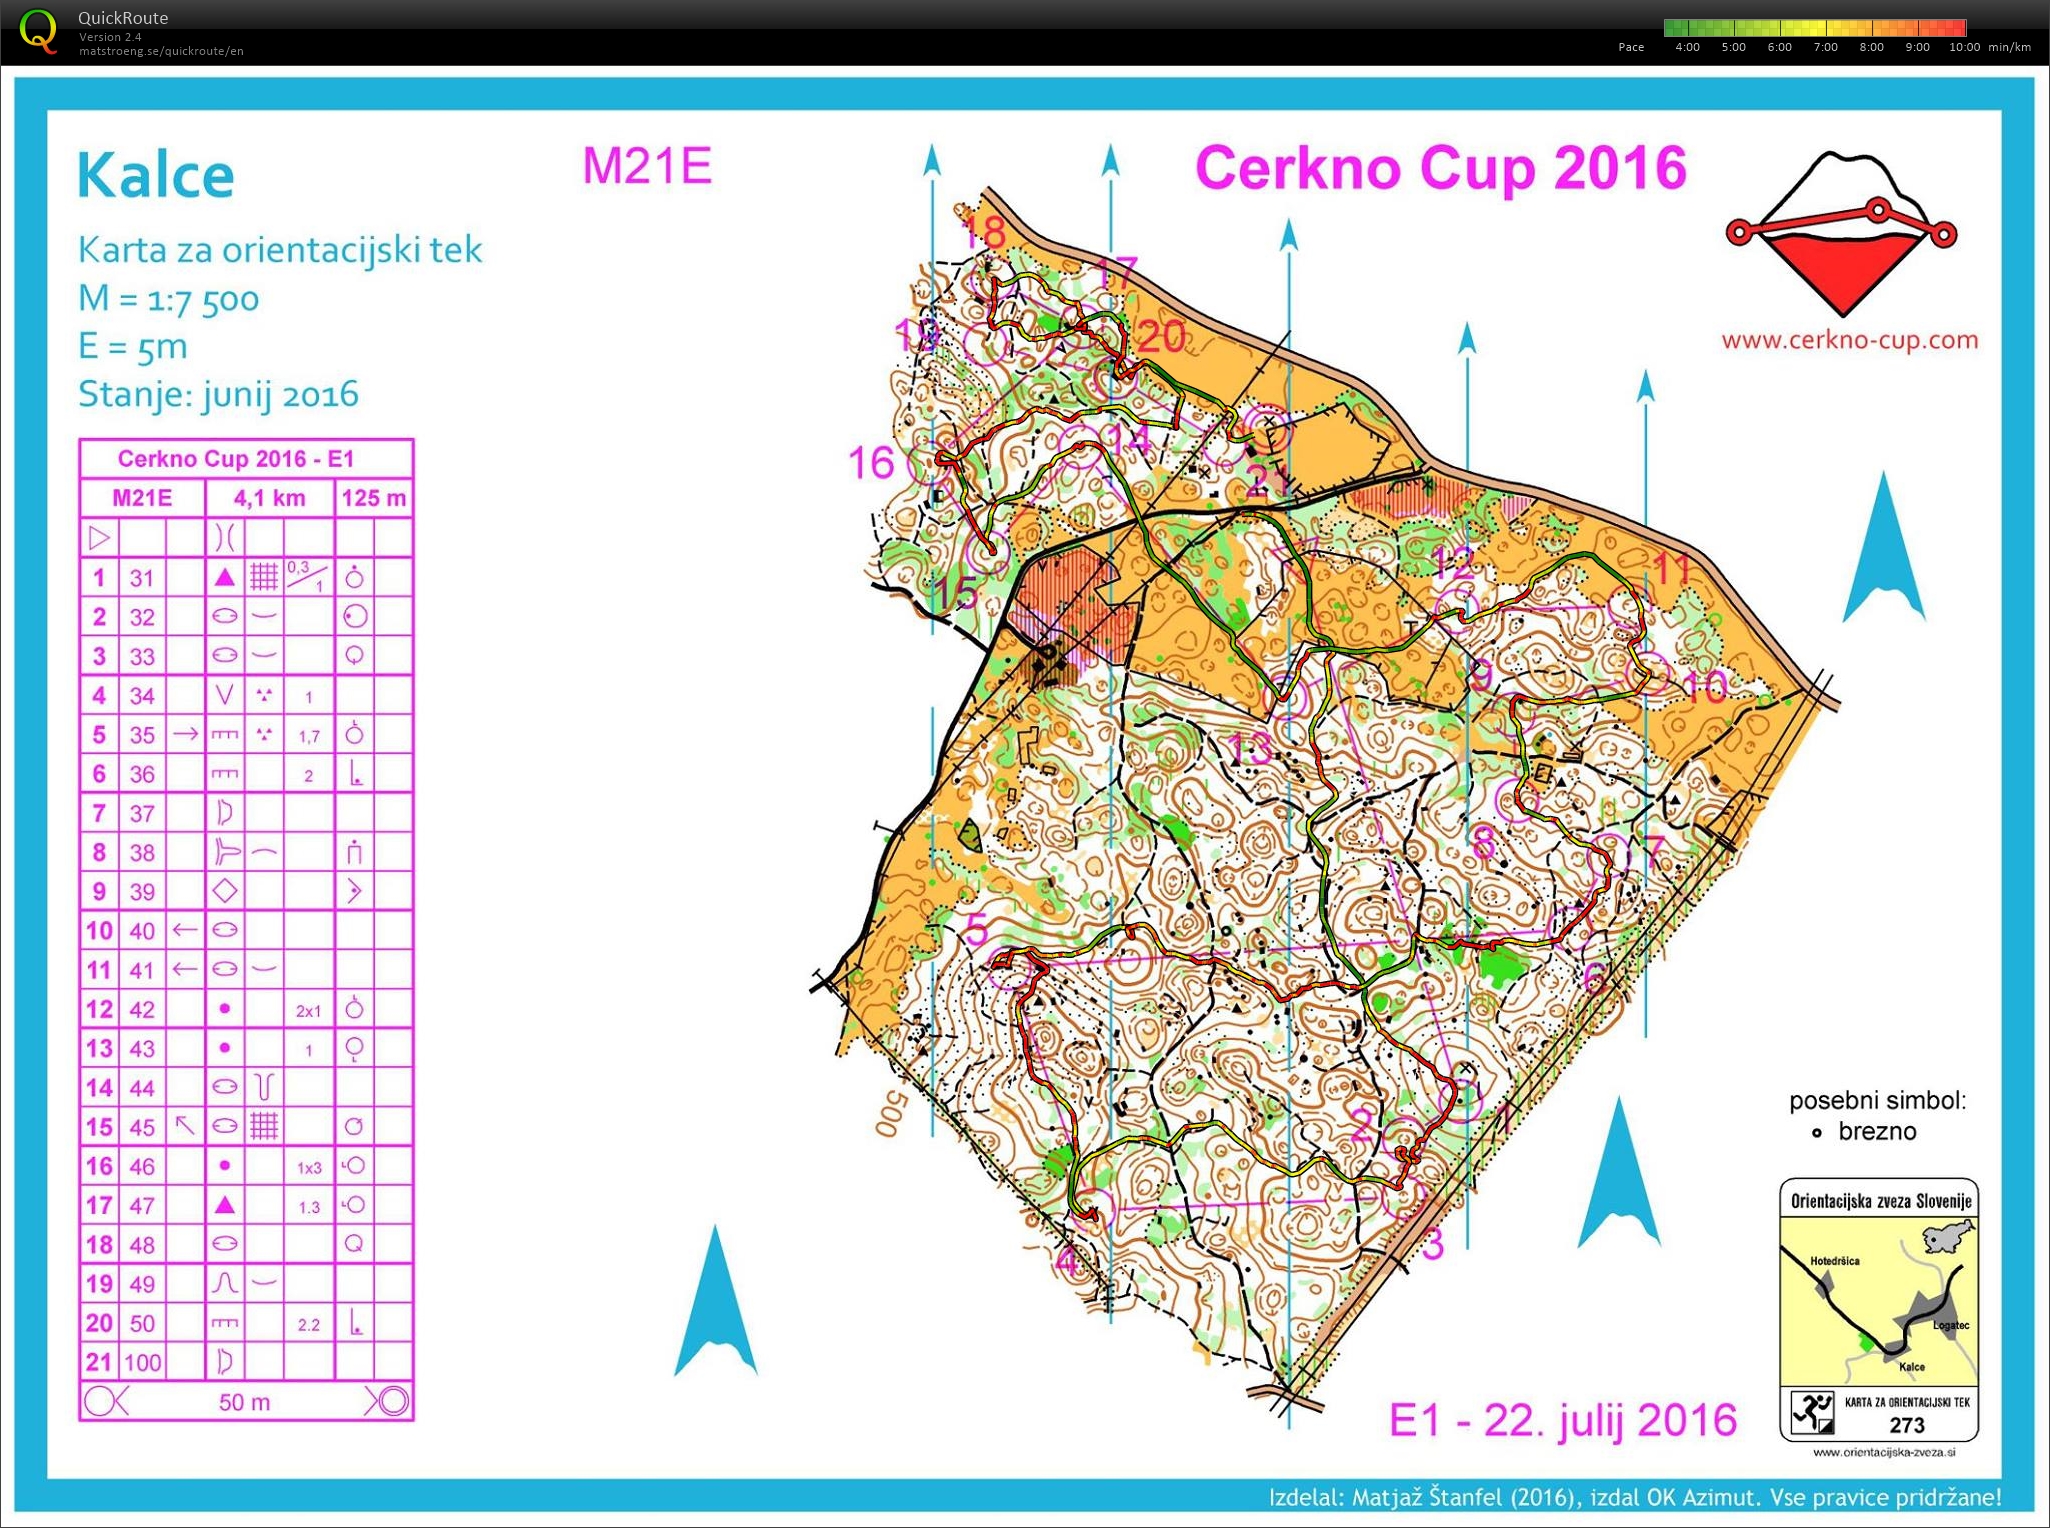 Cerkno Cup stage 1 (22-07-2016)